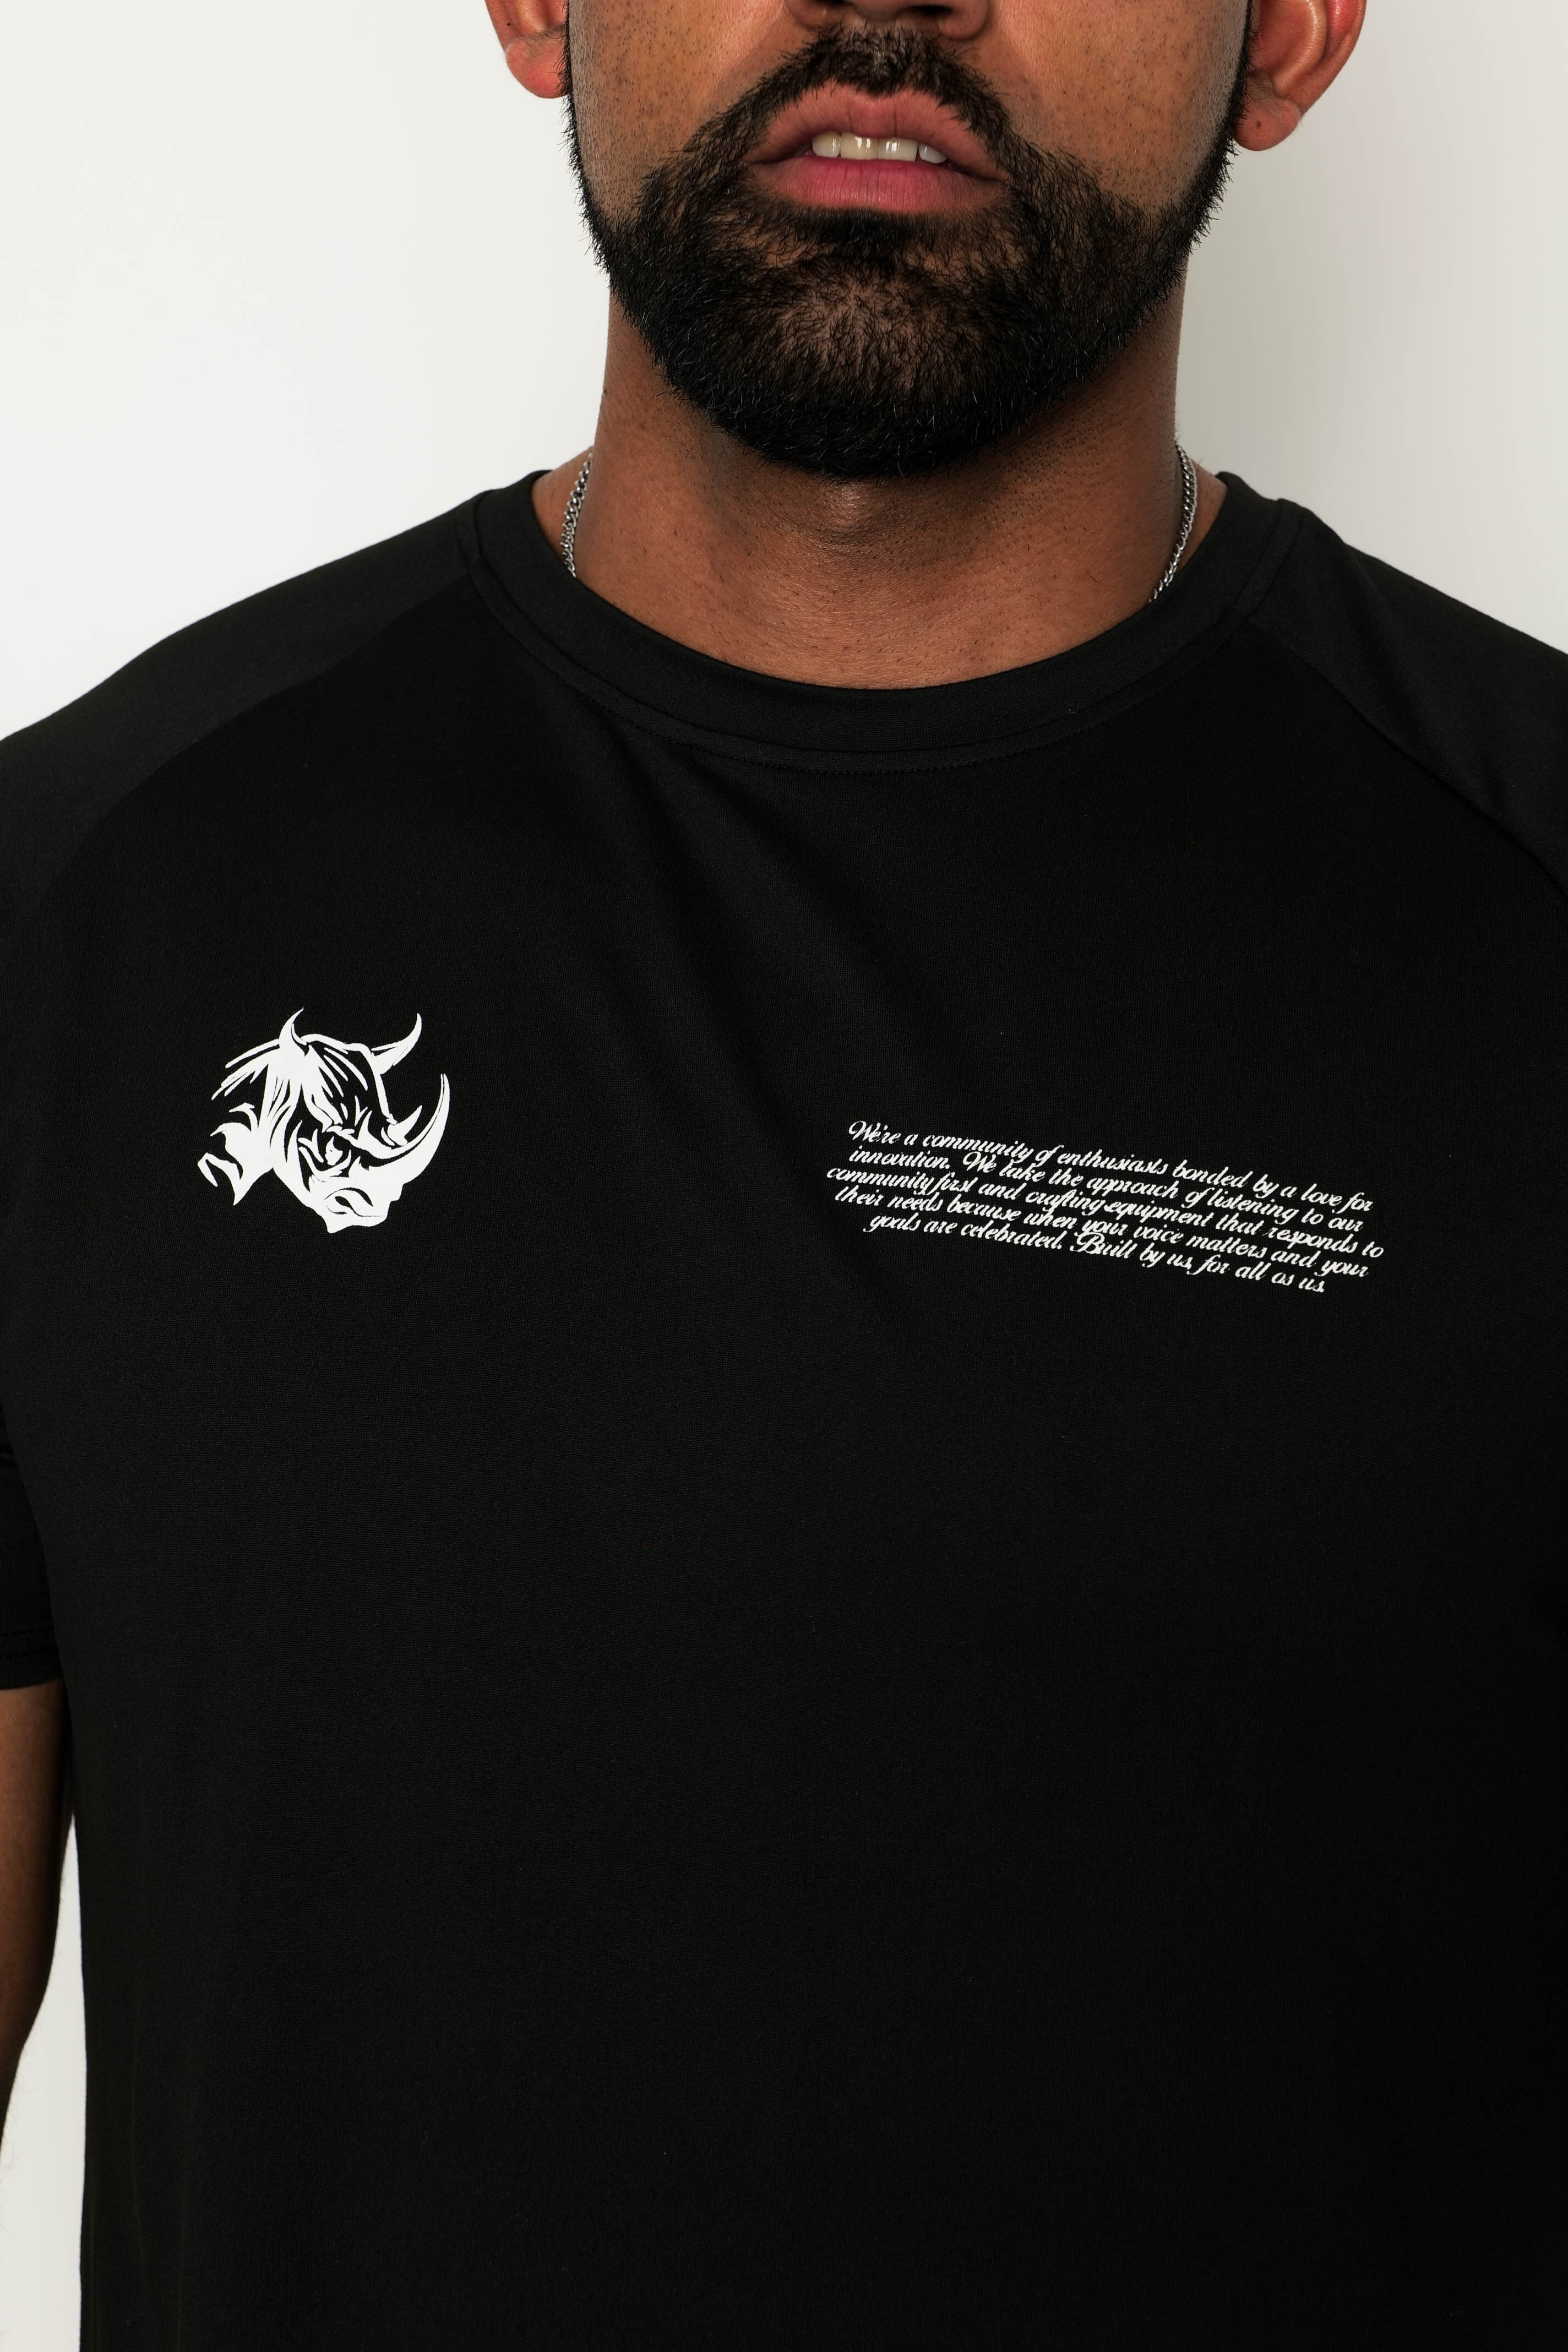 T-SHIRT - Unity Rhino Strength: Built by Us for Us